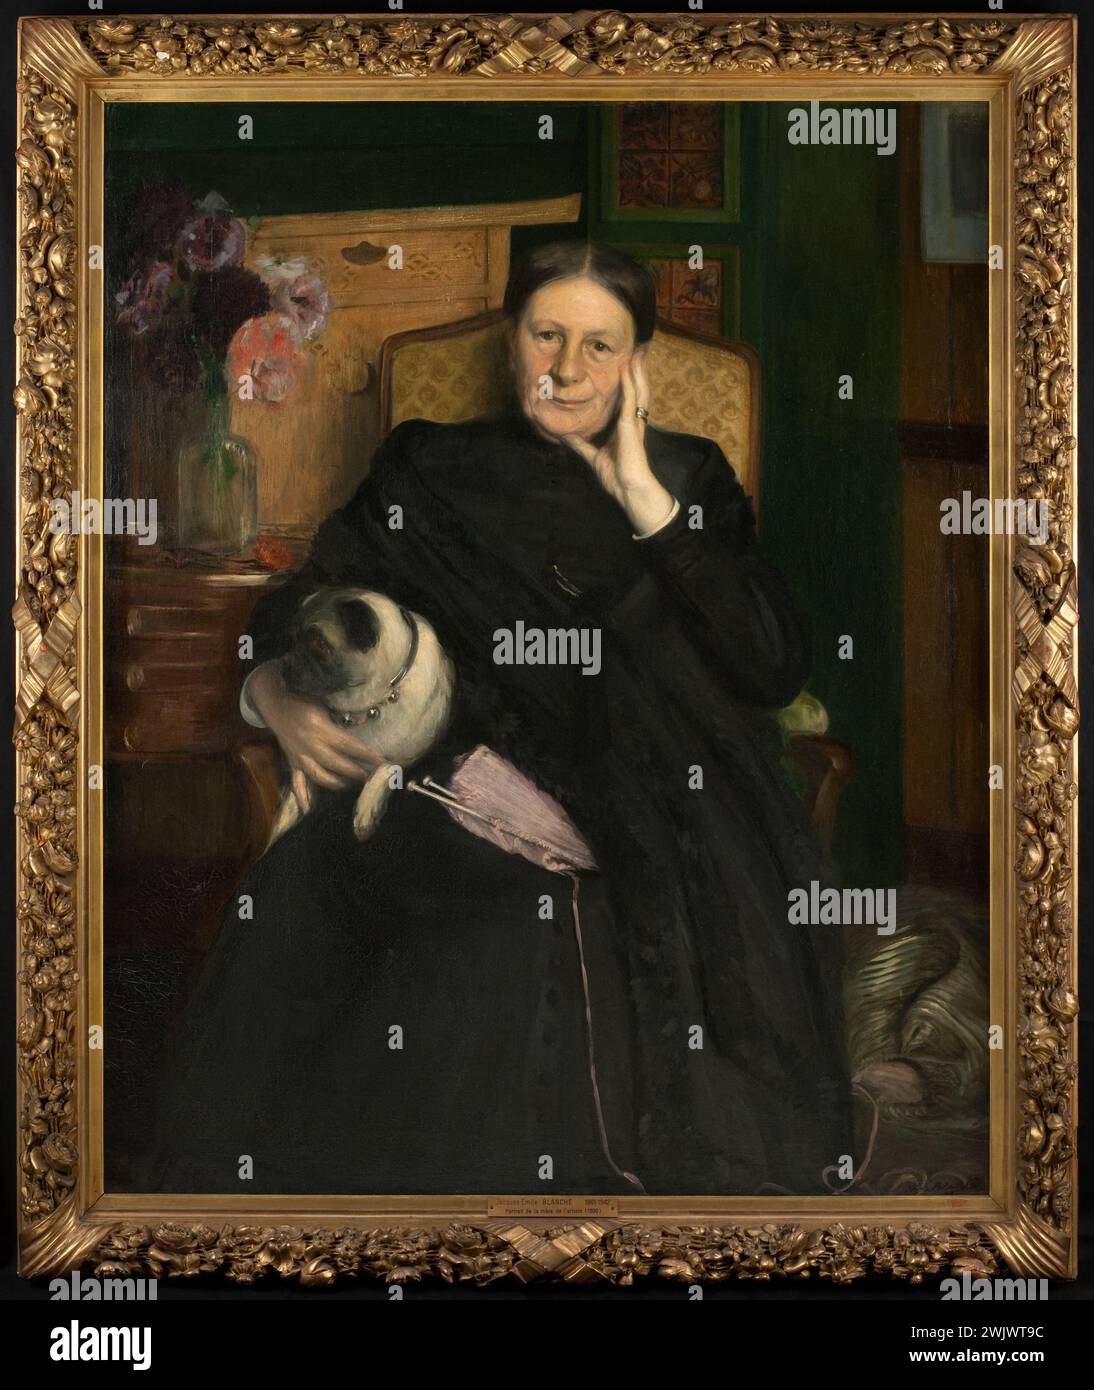 Jacques-Emile Blanche (1861-1942). 'Ms. Emile Blanche, mother of the artist'. Oil on canvas, 1890. Museum of Fine Arts of the city of Paris, Petit Palais. Ms. Emile Blanche, mother of the artist Aiguille, seat, black clothes, black dress, dignite, dignity, dog, wool wire, french painter, inside, interior, interior, knit, knitting needle, knitting pine, knitting, look, mother, mother, nedle, black, old woman , Work, painter, painter, french painter, person age, people in nature, portrait, gaze, black dress, senior, severe, severerite, sit, solemn, knitting, knitting, black vetement, interior vi Stock Photo